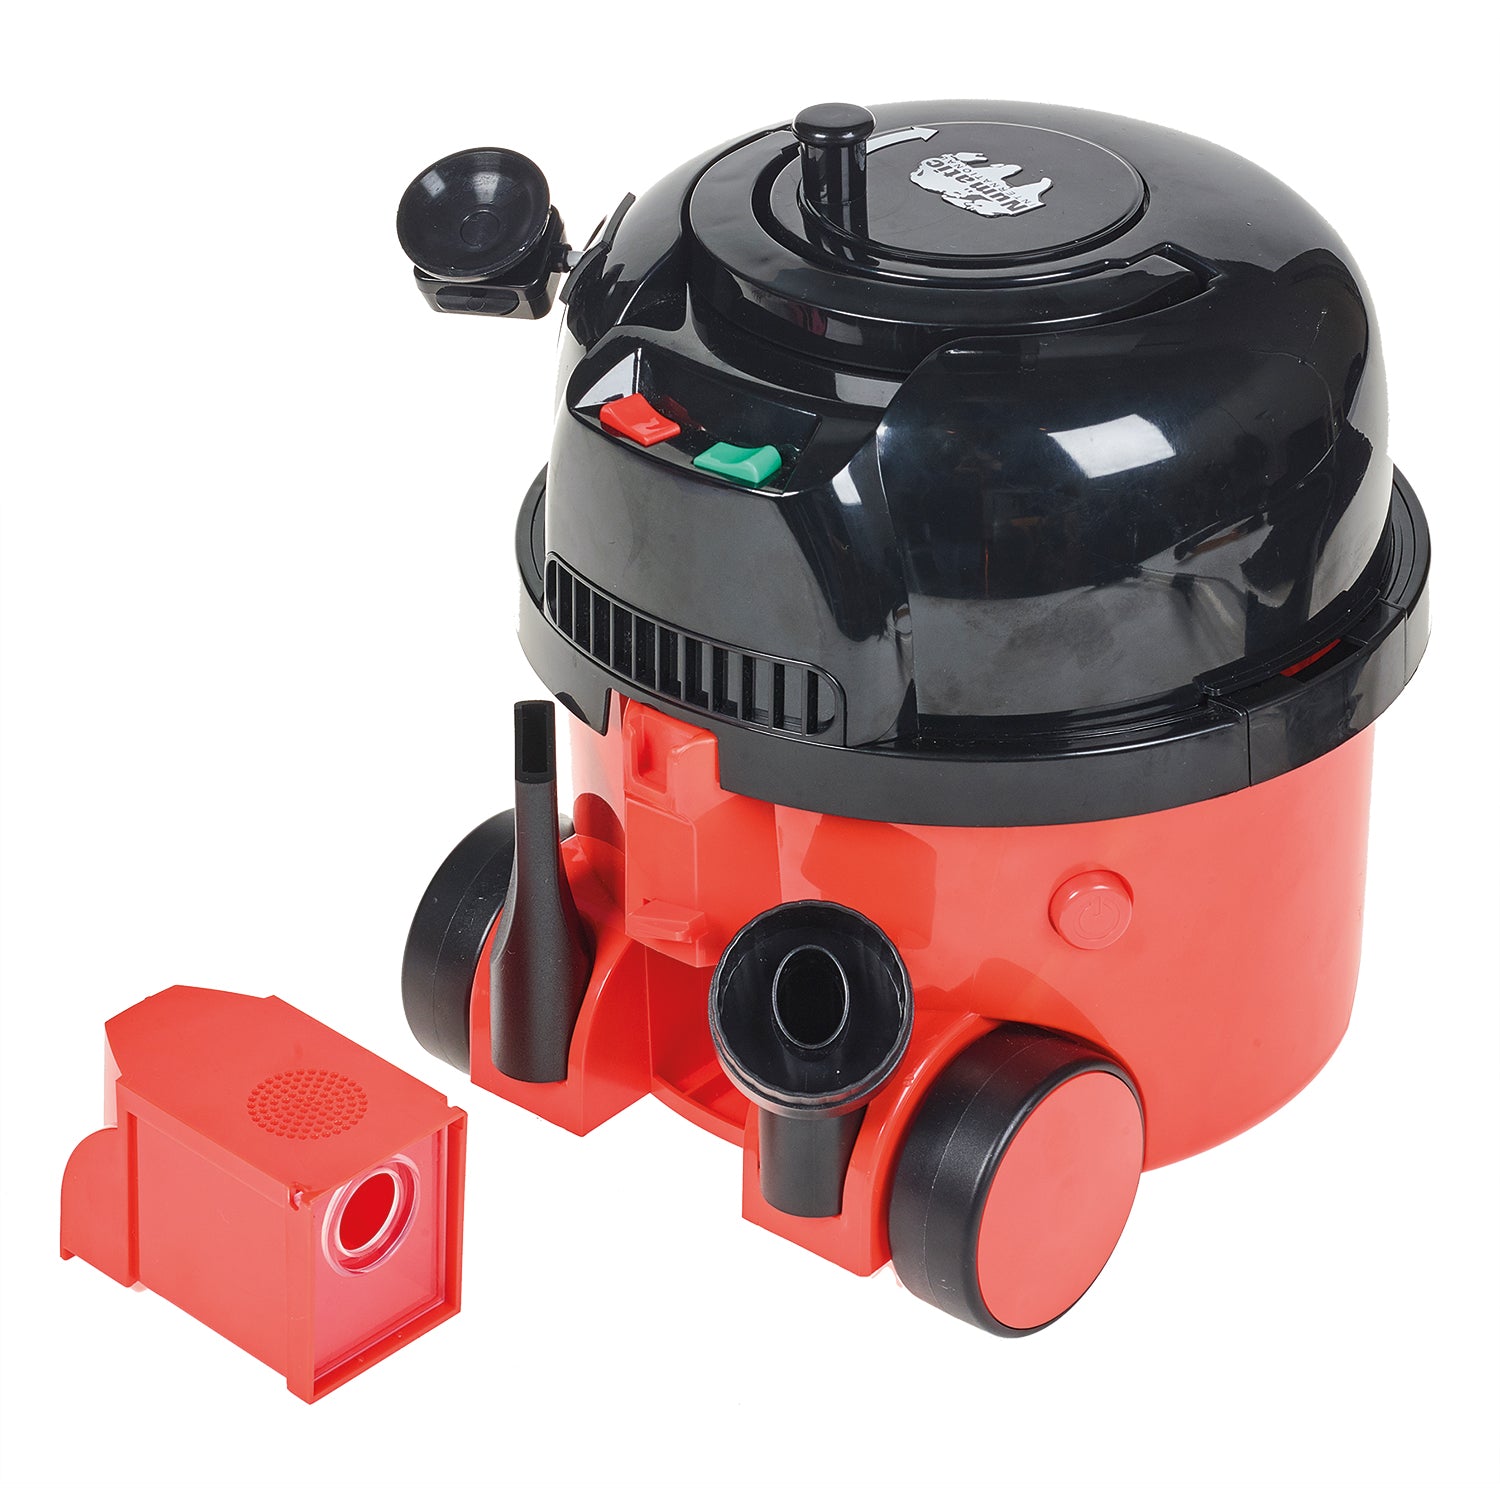 Casdon - Henry Vacuum Cleaner Toy